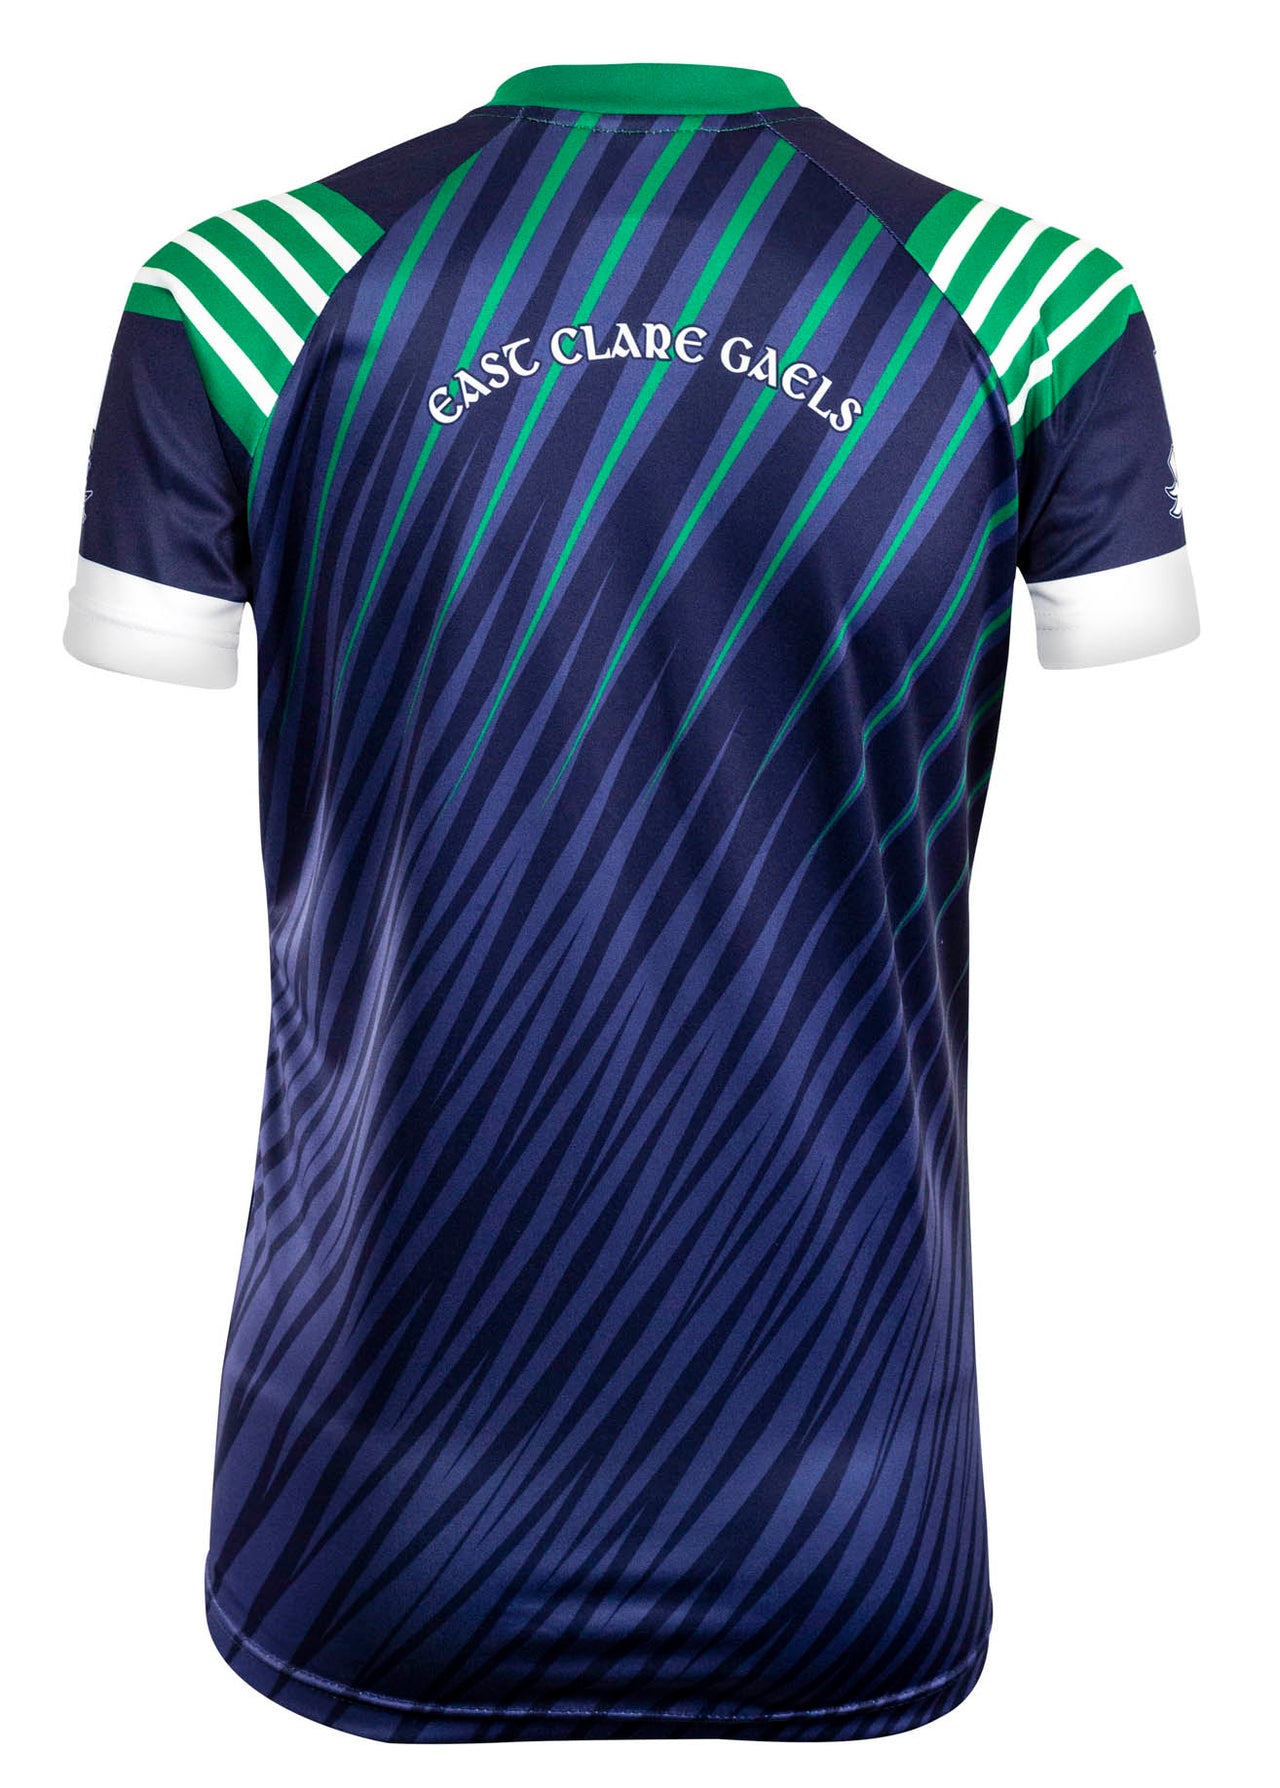 East Clare Gaels Training Jersey Regular Fit Adult